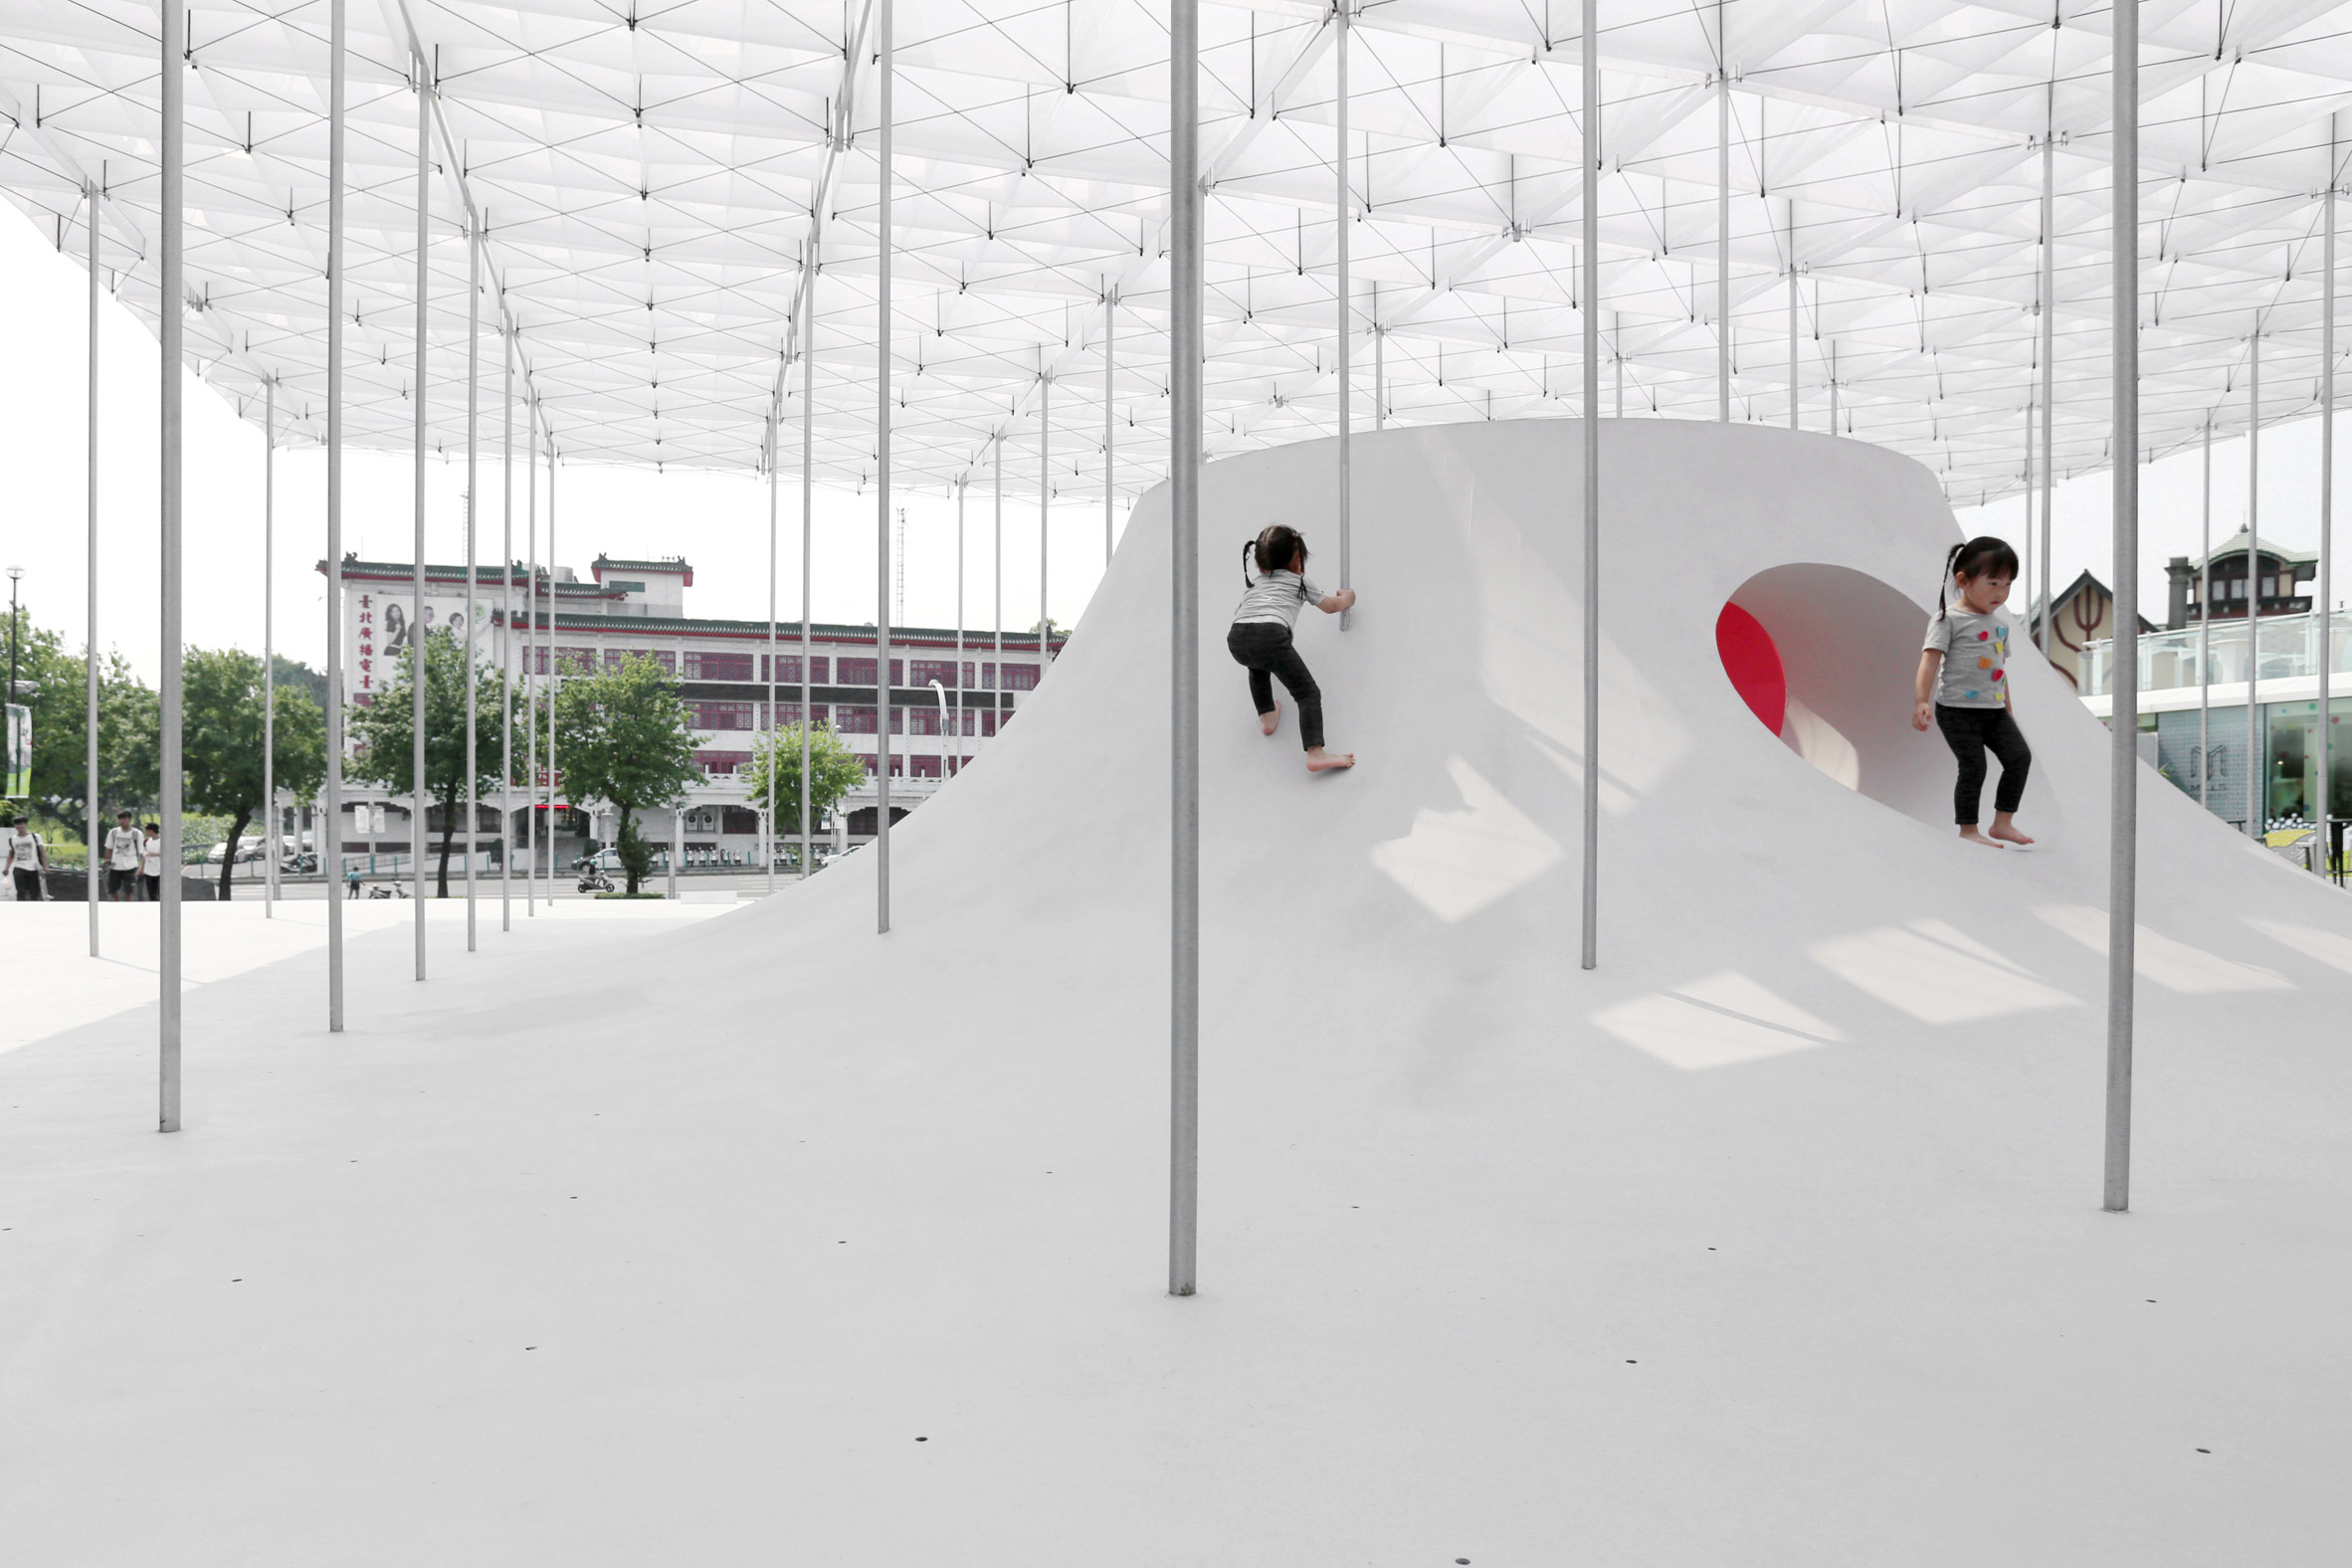 Shen Ting Tseng Architects' pavilion "floats" above a plaza at the Taipei Fine Arts Museum